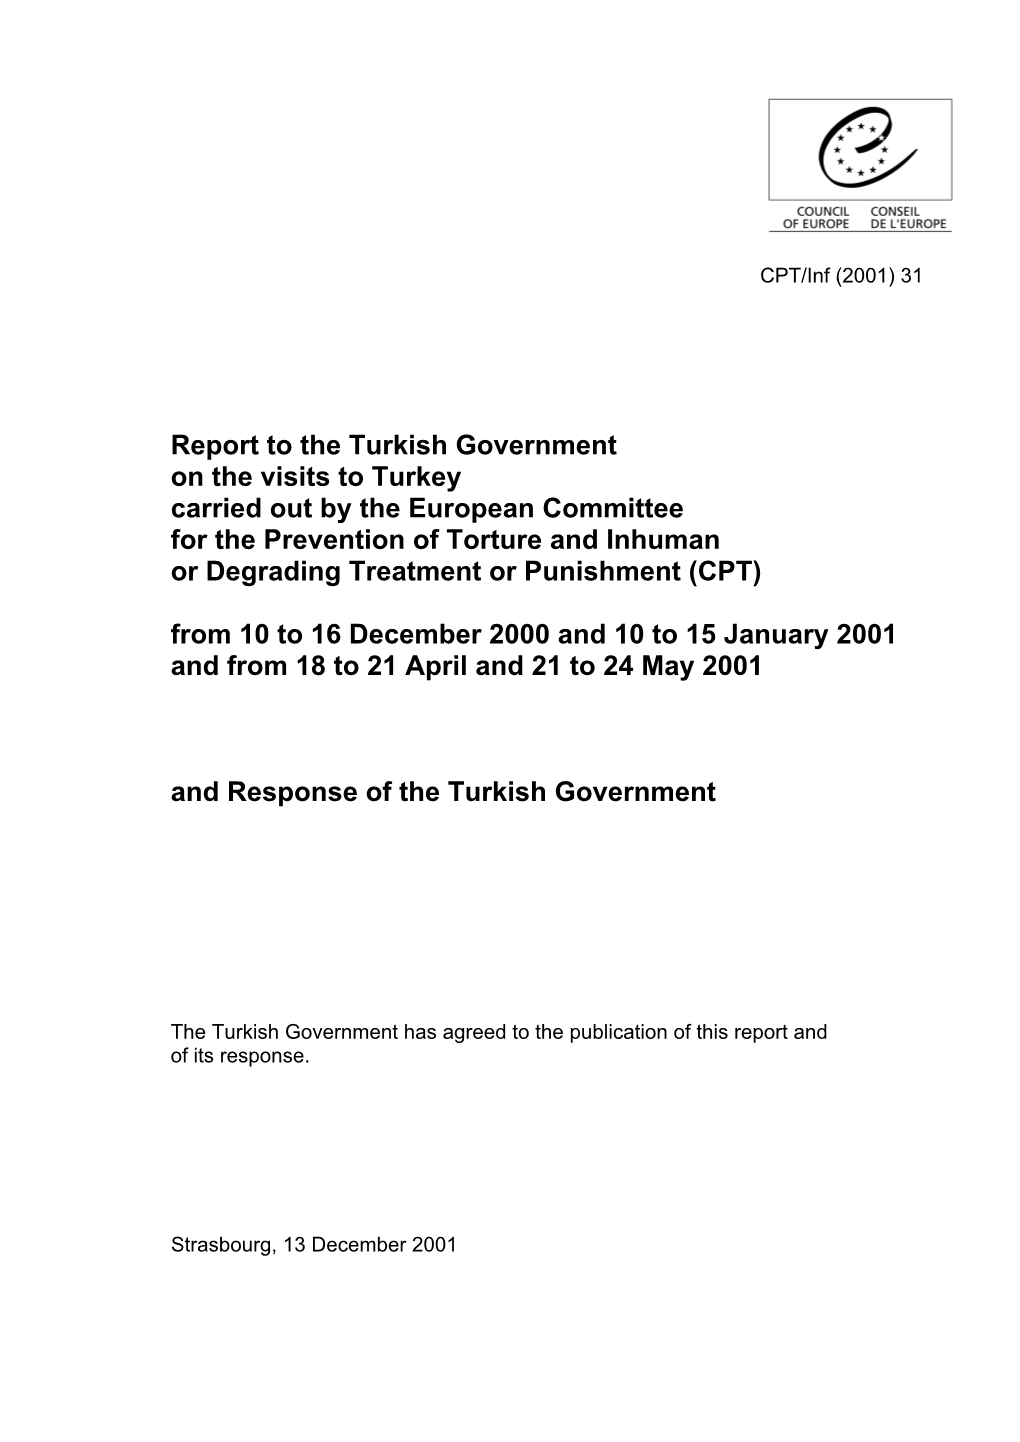 Report to the Turkish Government on the Visits to Turkey Carried out By